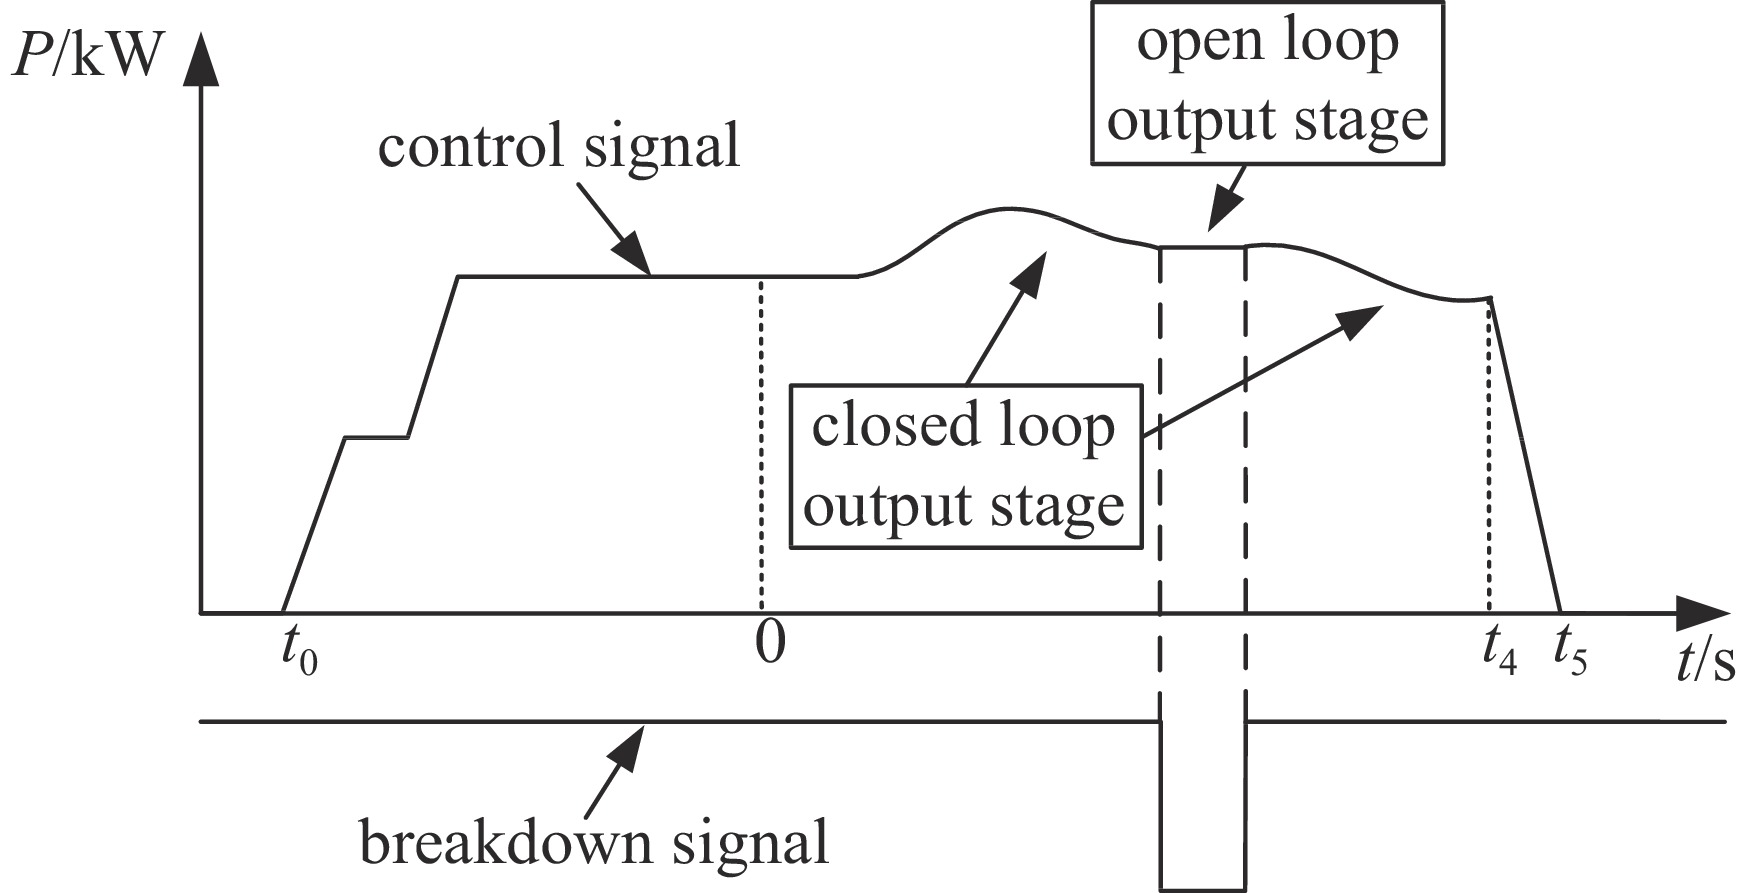 Schematic diagram of open-loop/closed-loop control switching according to breakdown signal